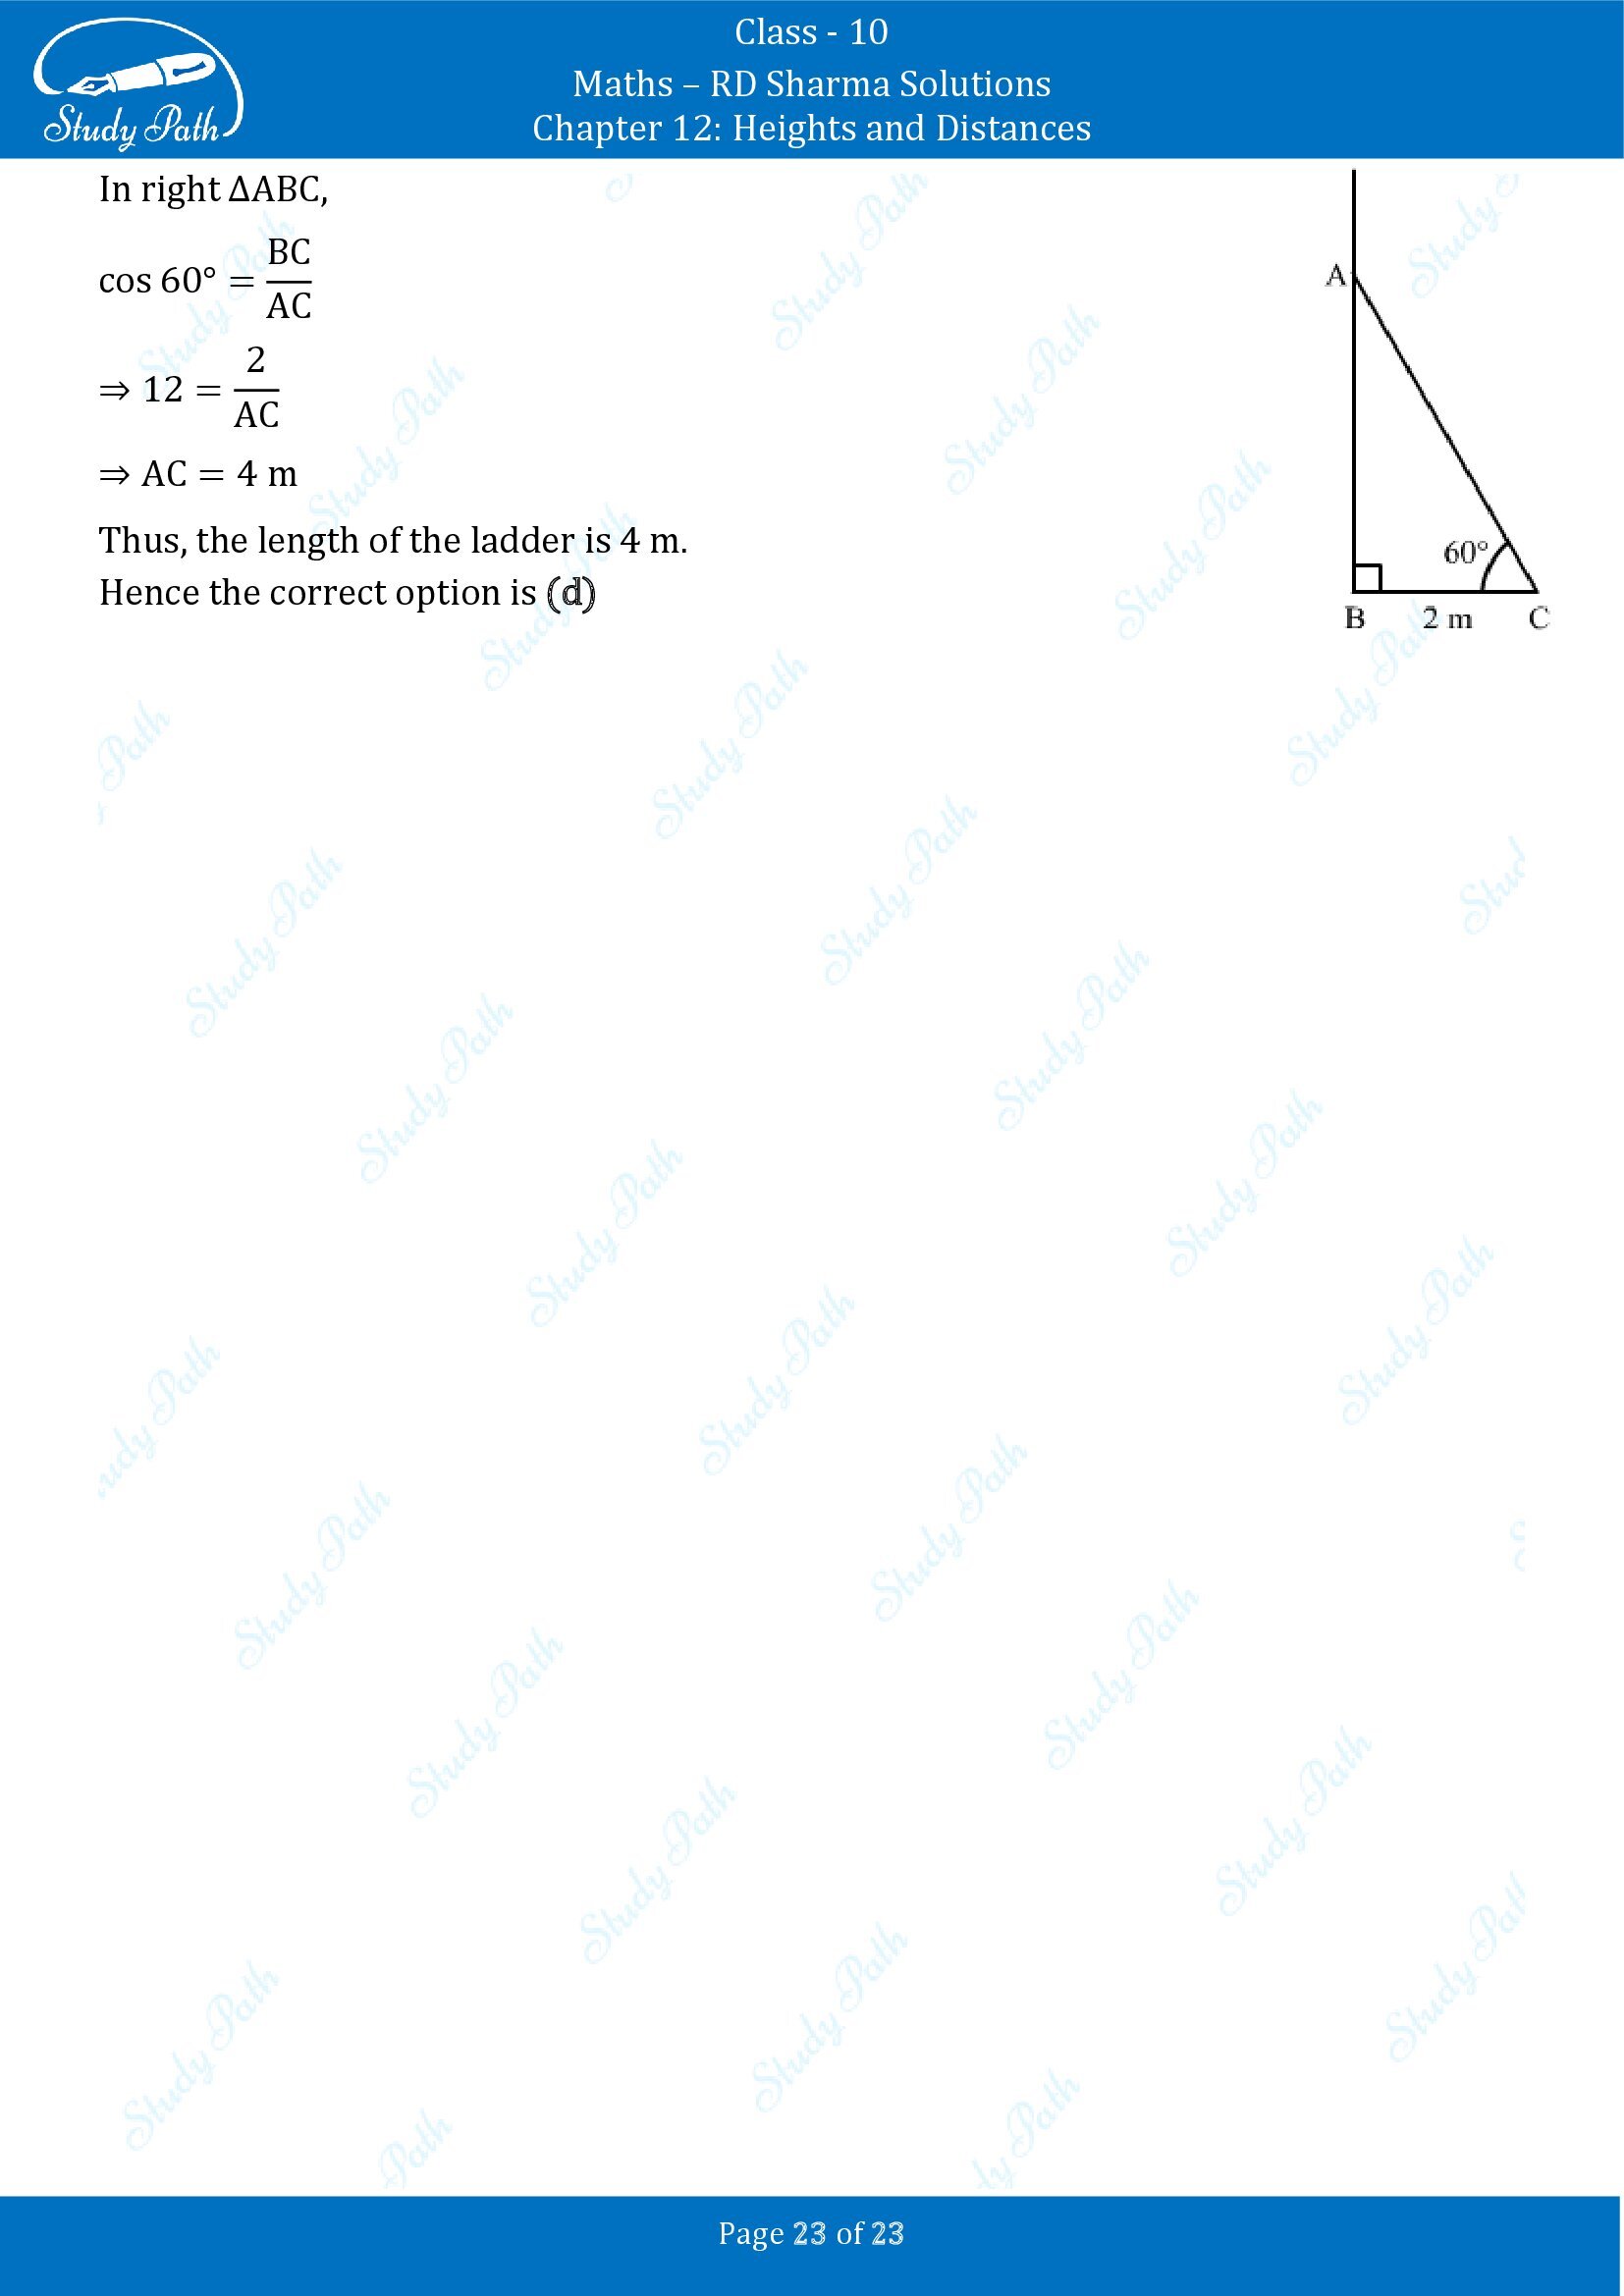 RD Sharma Solutions Class 10 Chapter 12 Heights and Distances Multiple Choice Question MCQs 00023